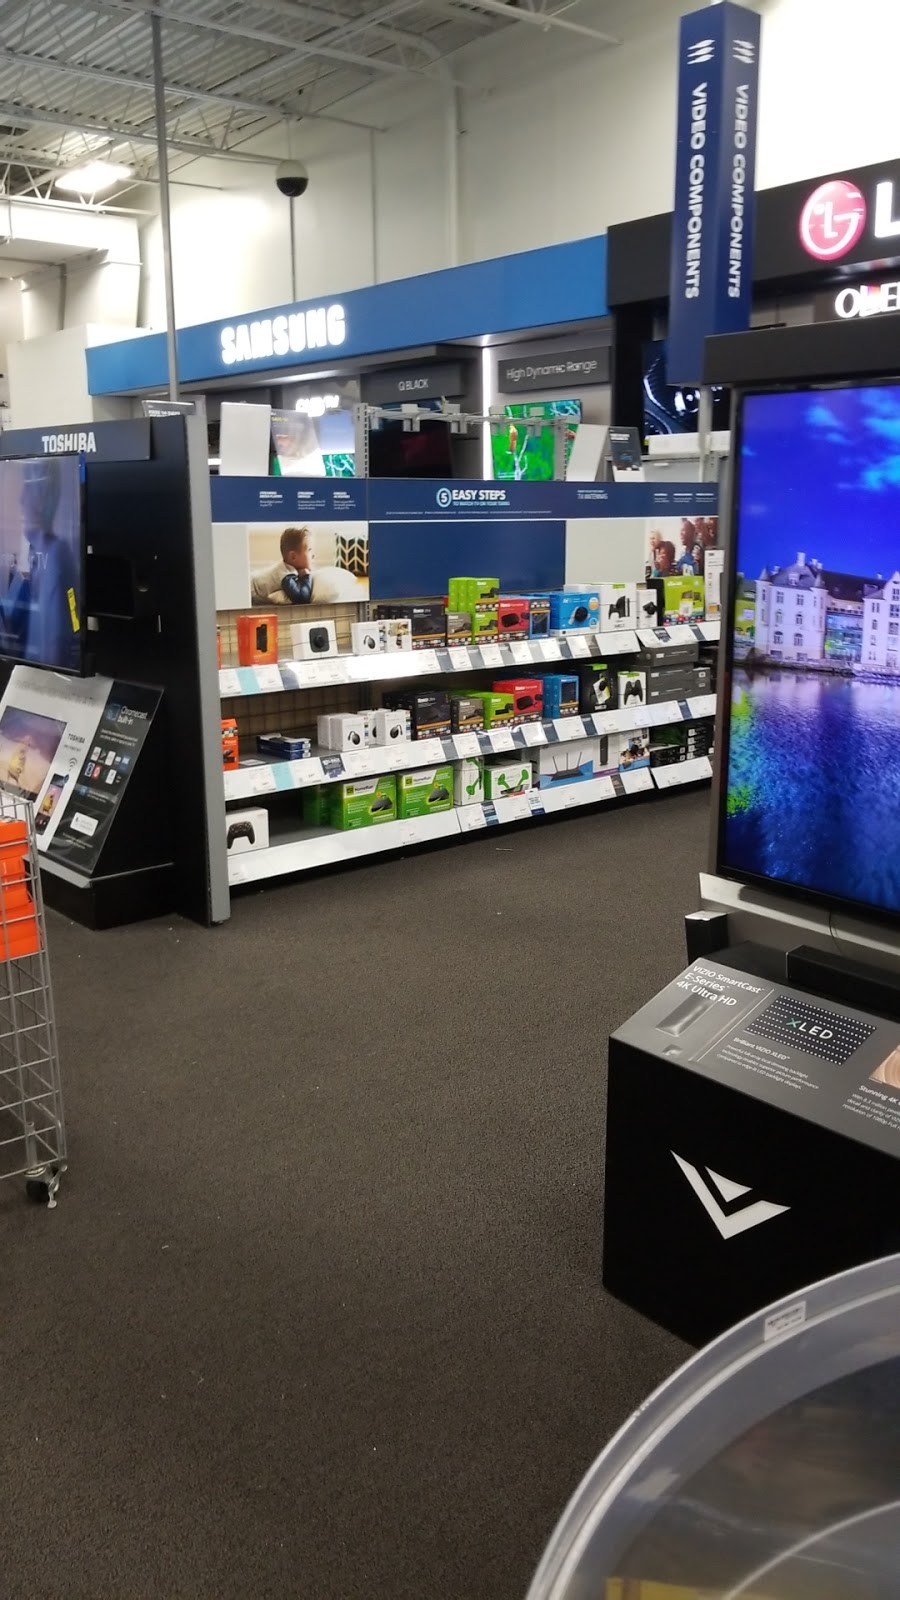 Best Buy | 2001 South Rd, Poughkeepsie, NY 12601 | Phone: (845) 298-8077